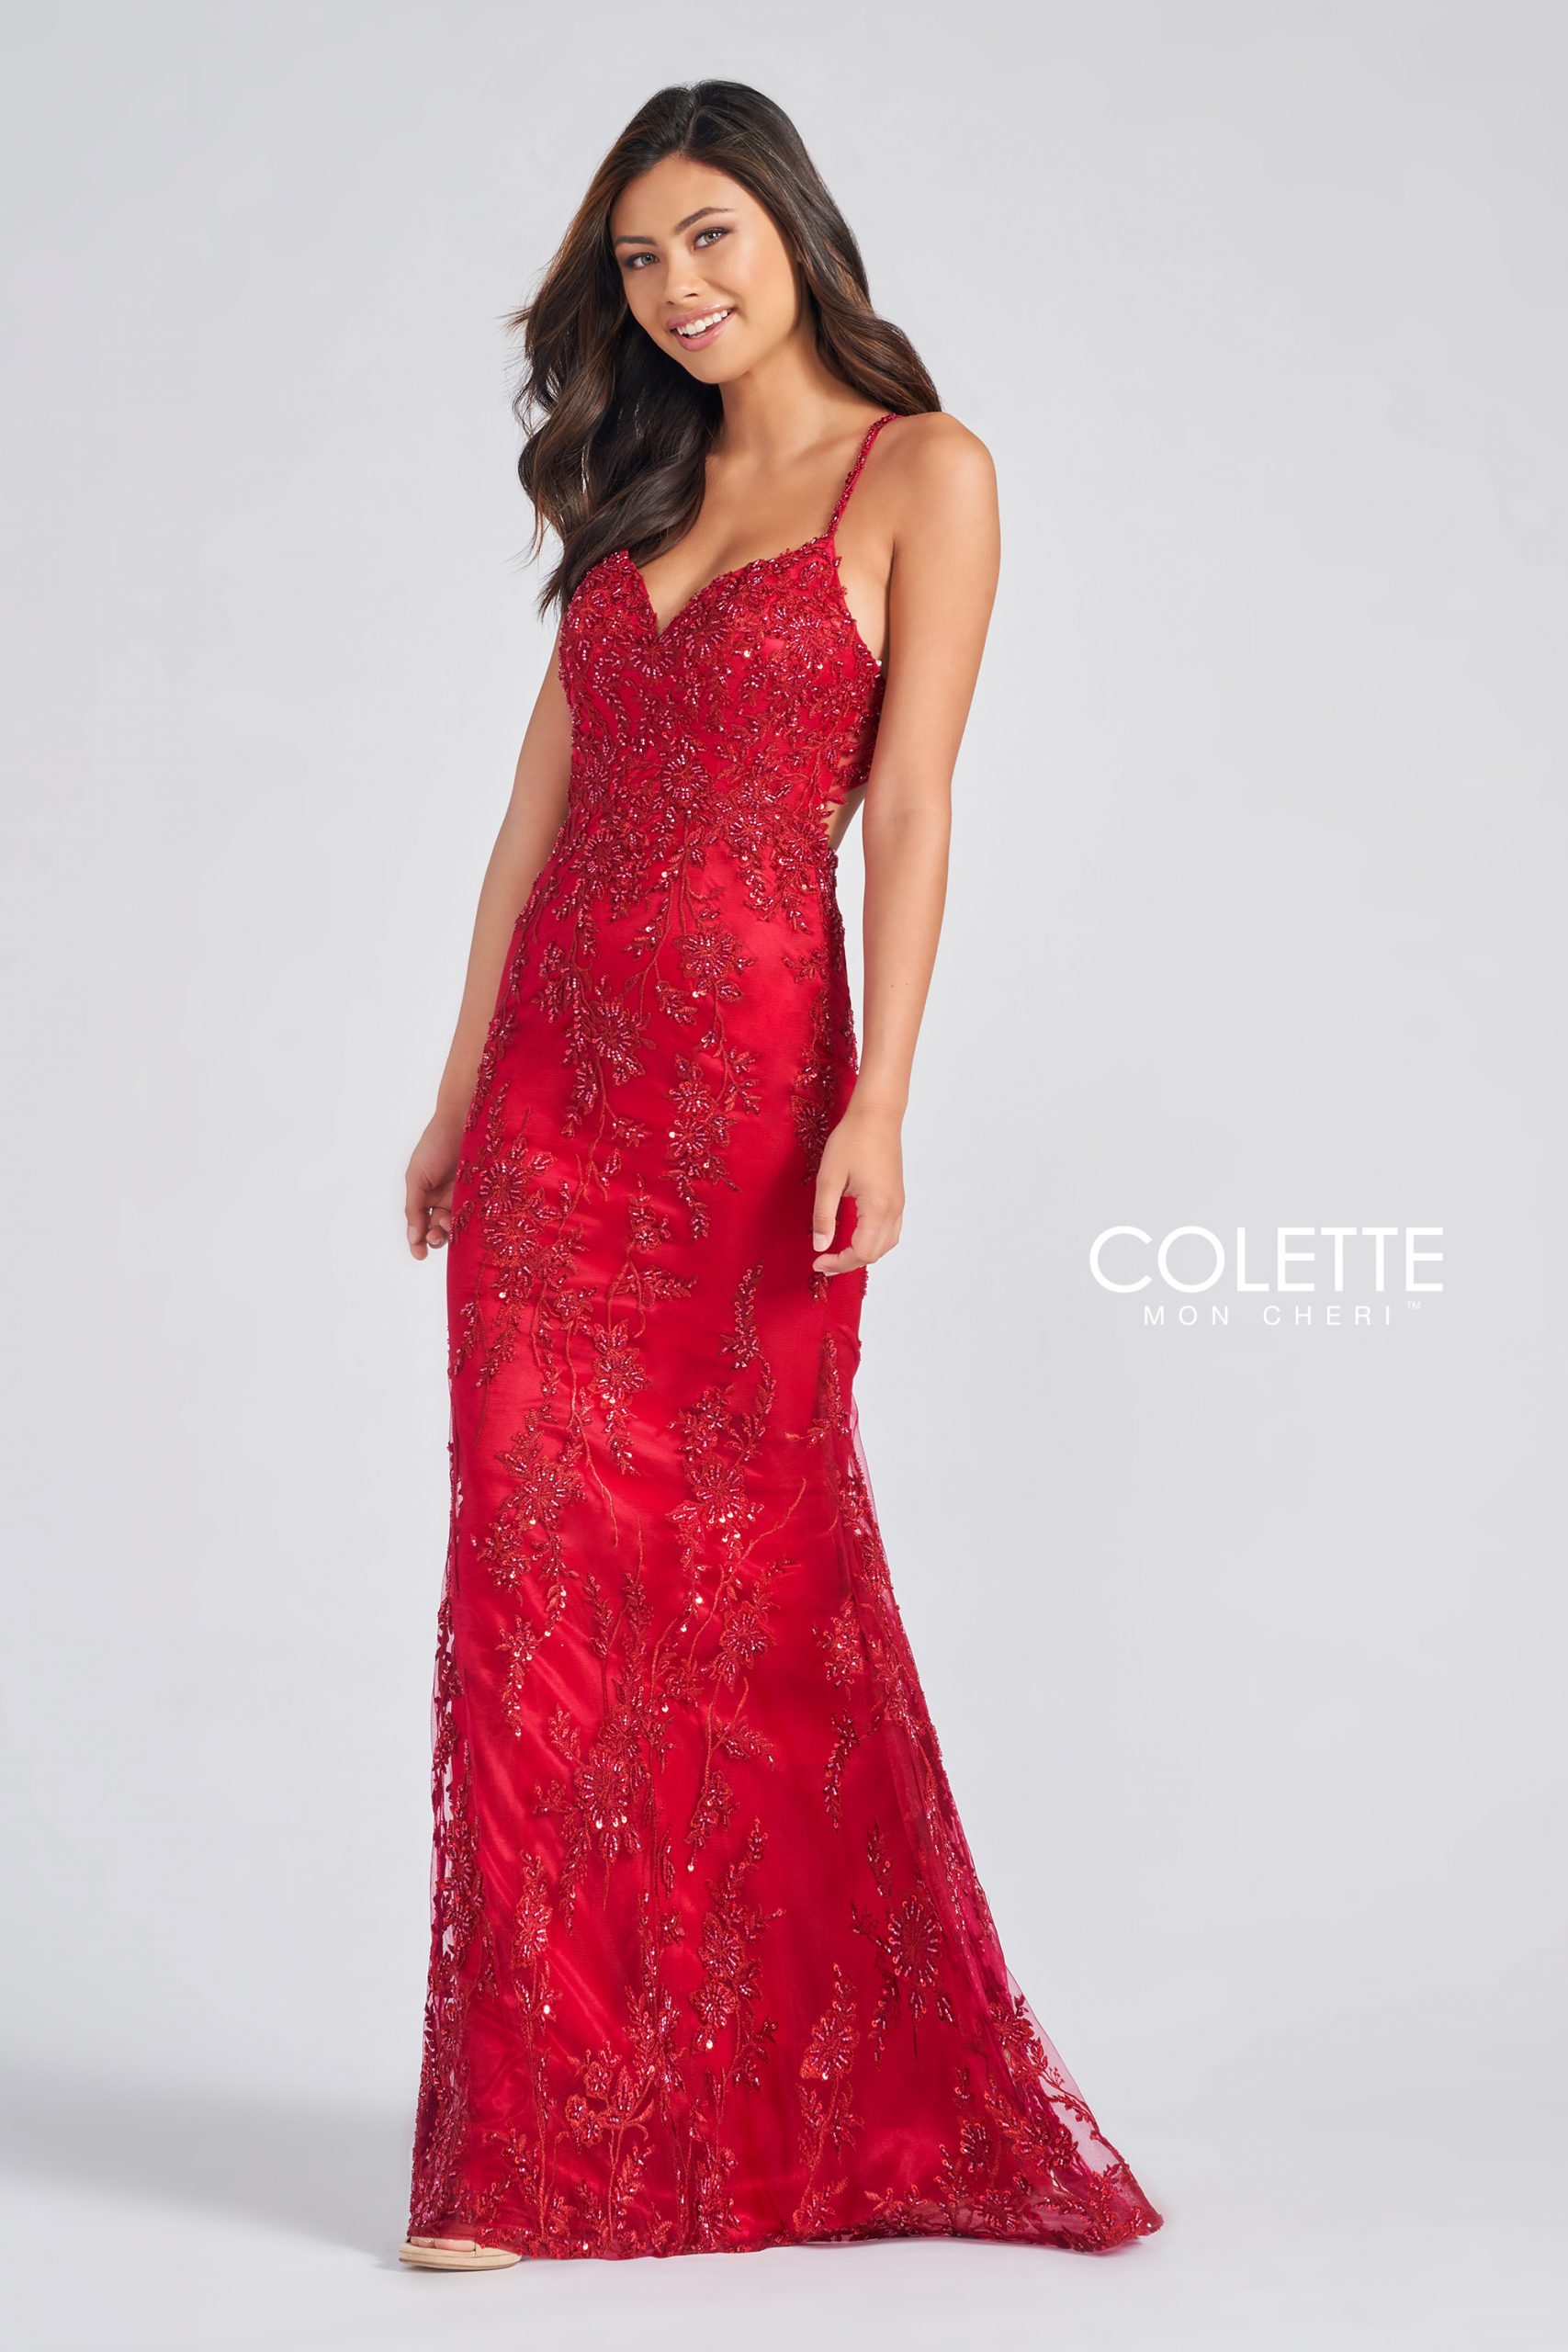 CL12240 - Colette dresses available at Lisa's Bridal